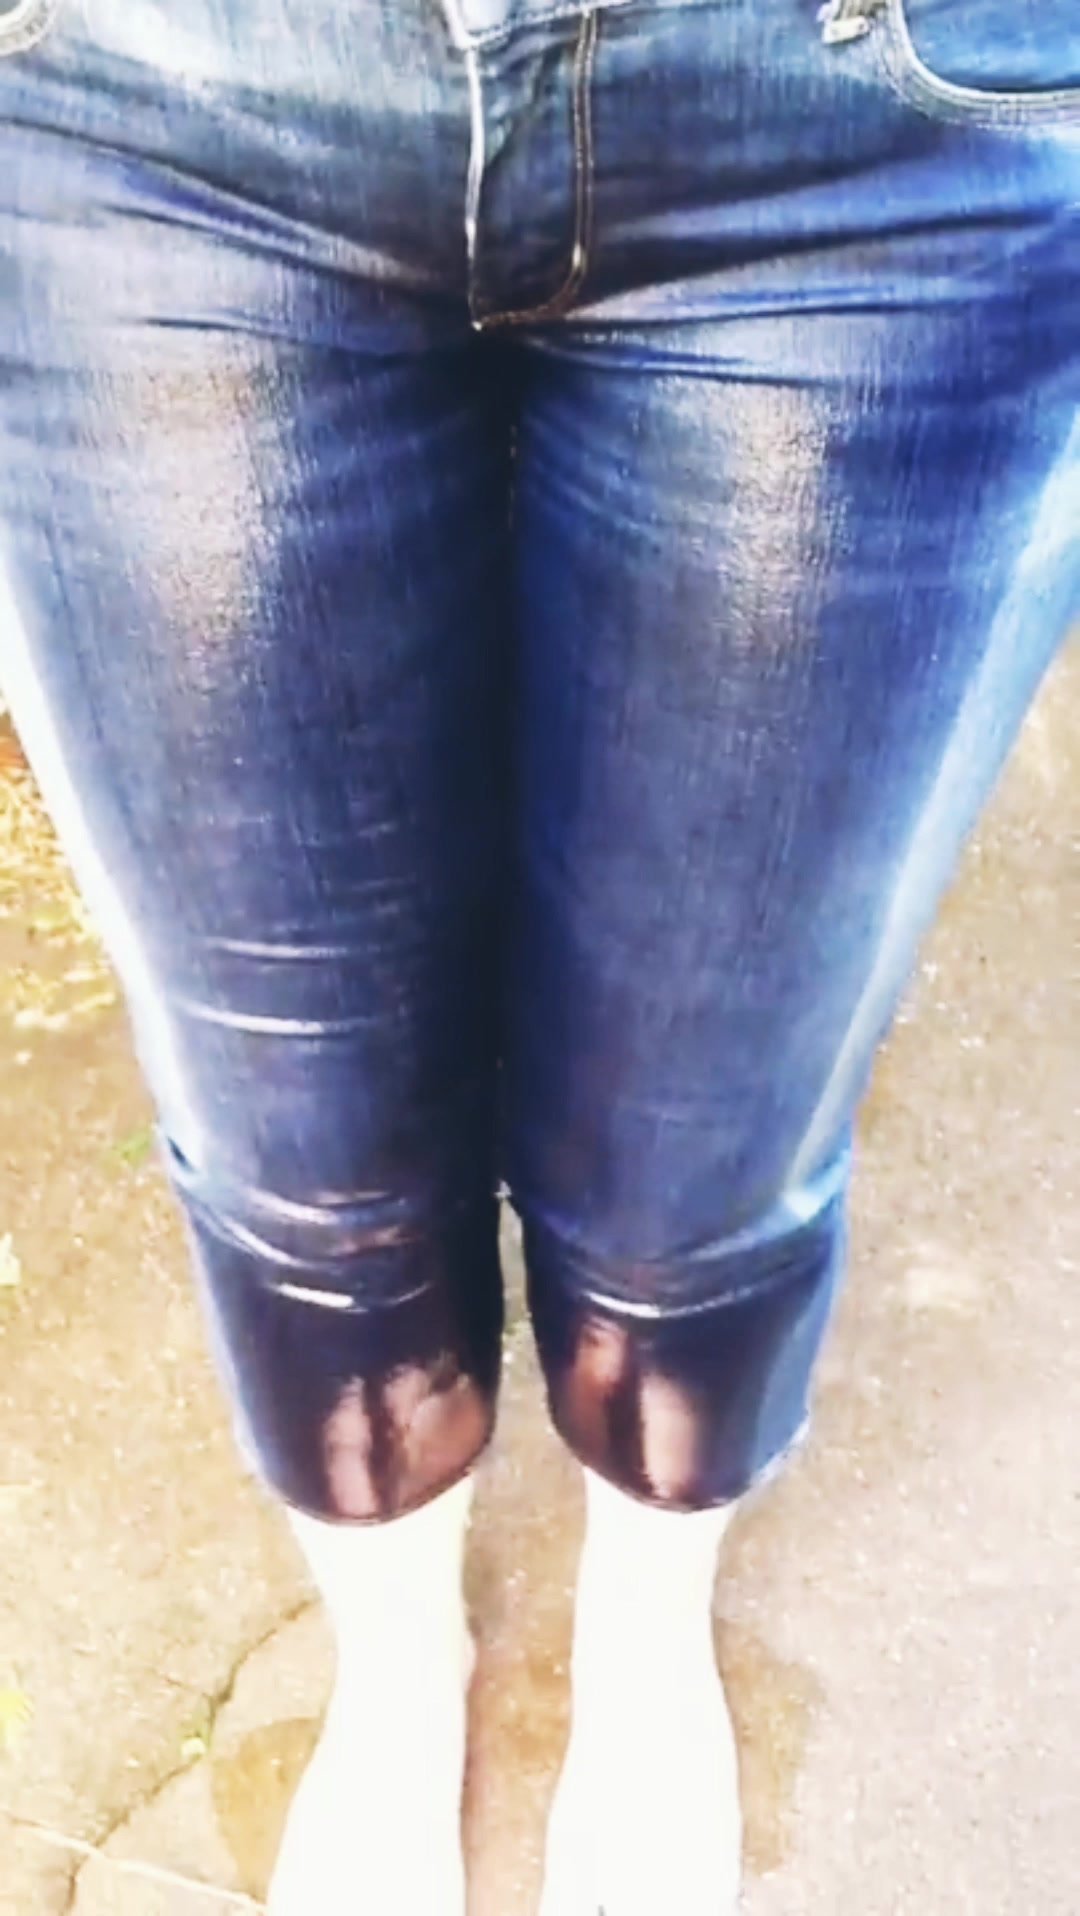 Woman Walks and Wets Her Pants